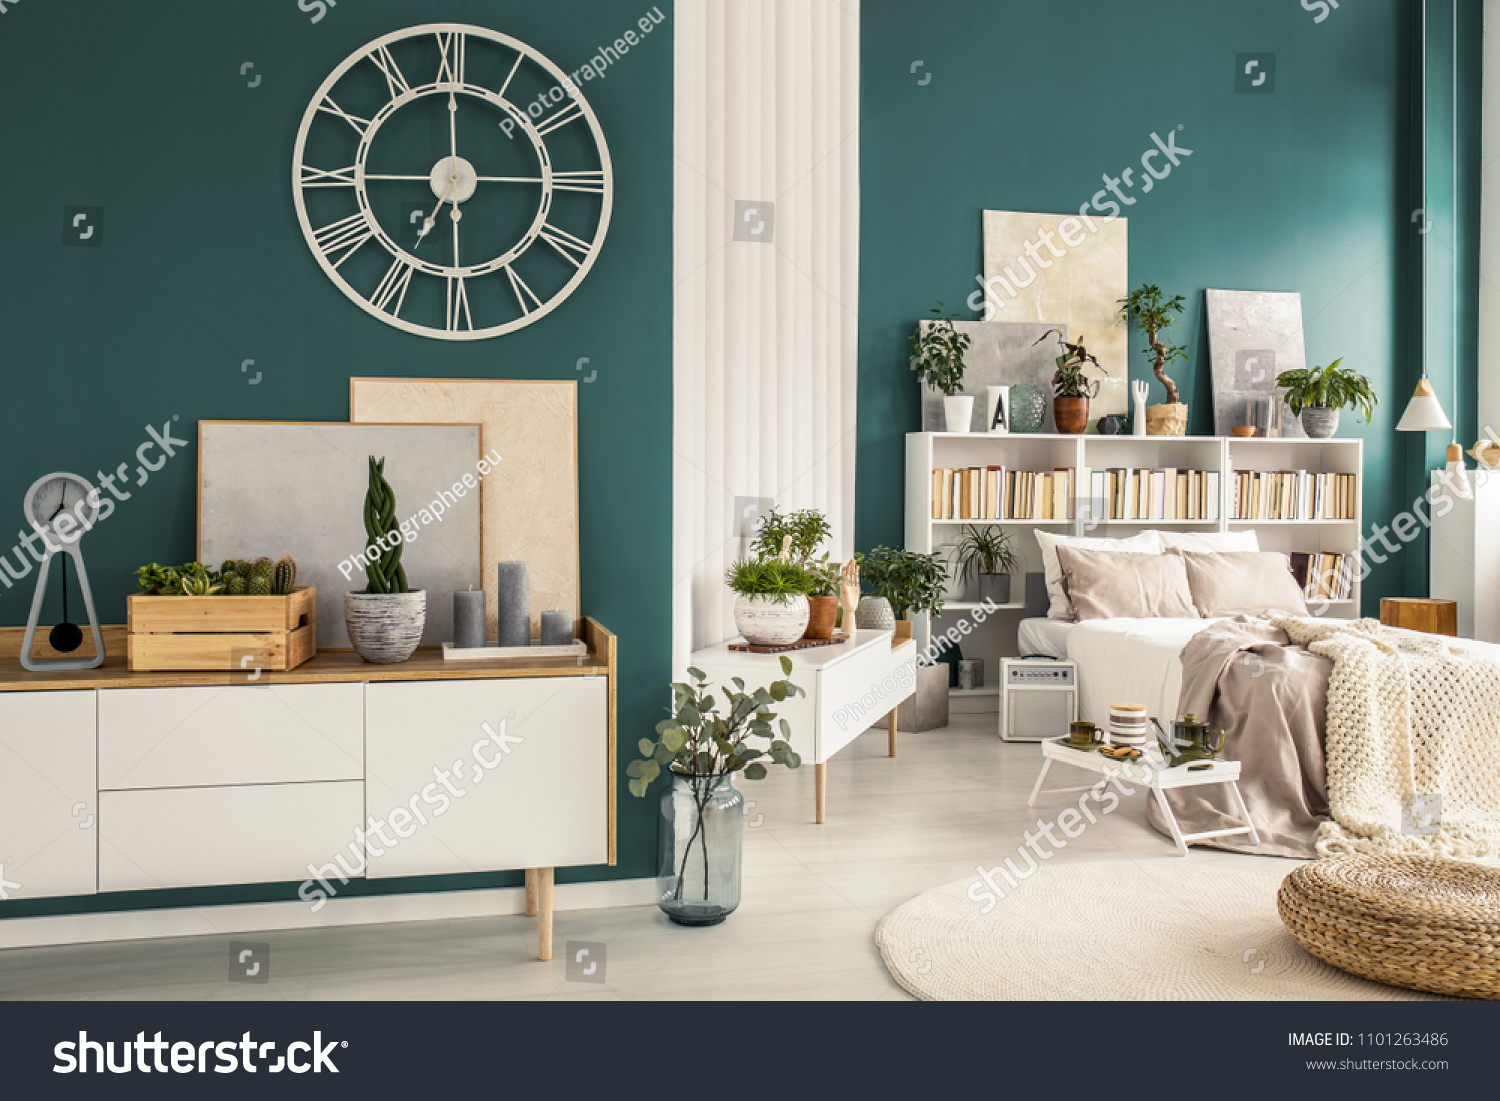 Modern studio apartment interior with cozy bedroom, white wooden furniture, designer decorations and plants #1101263486